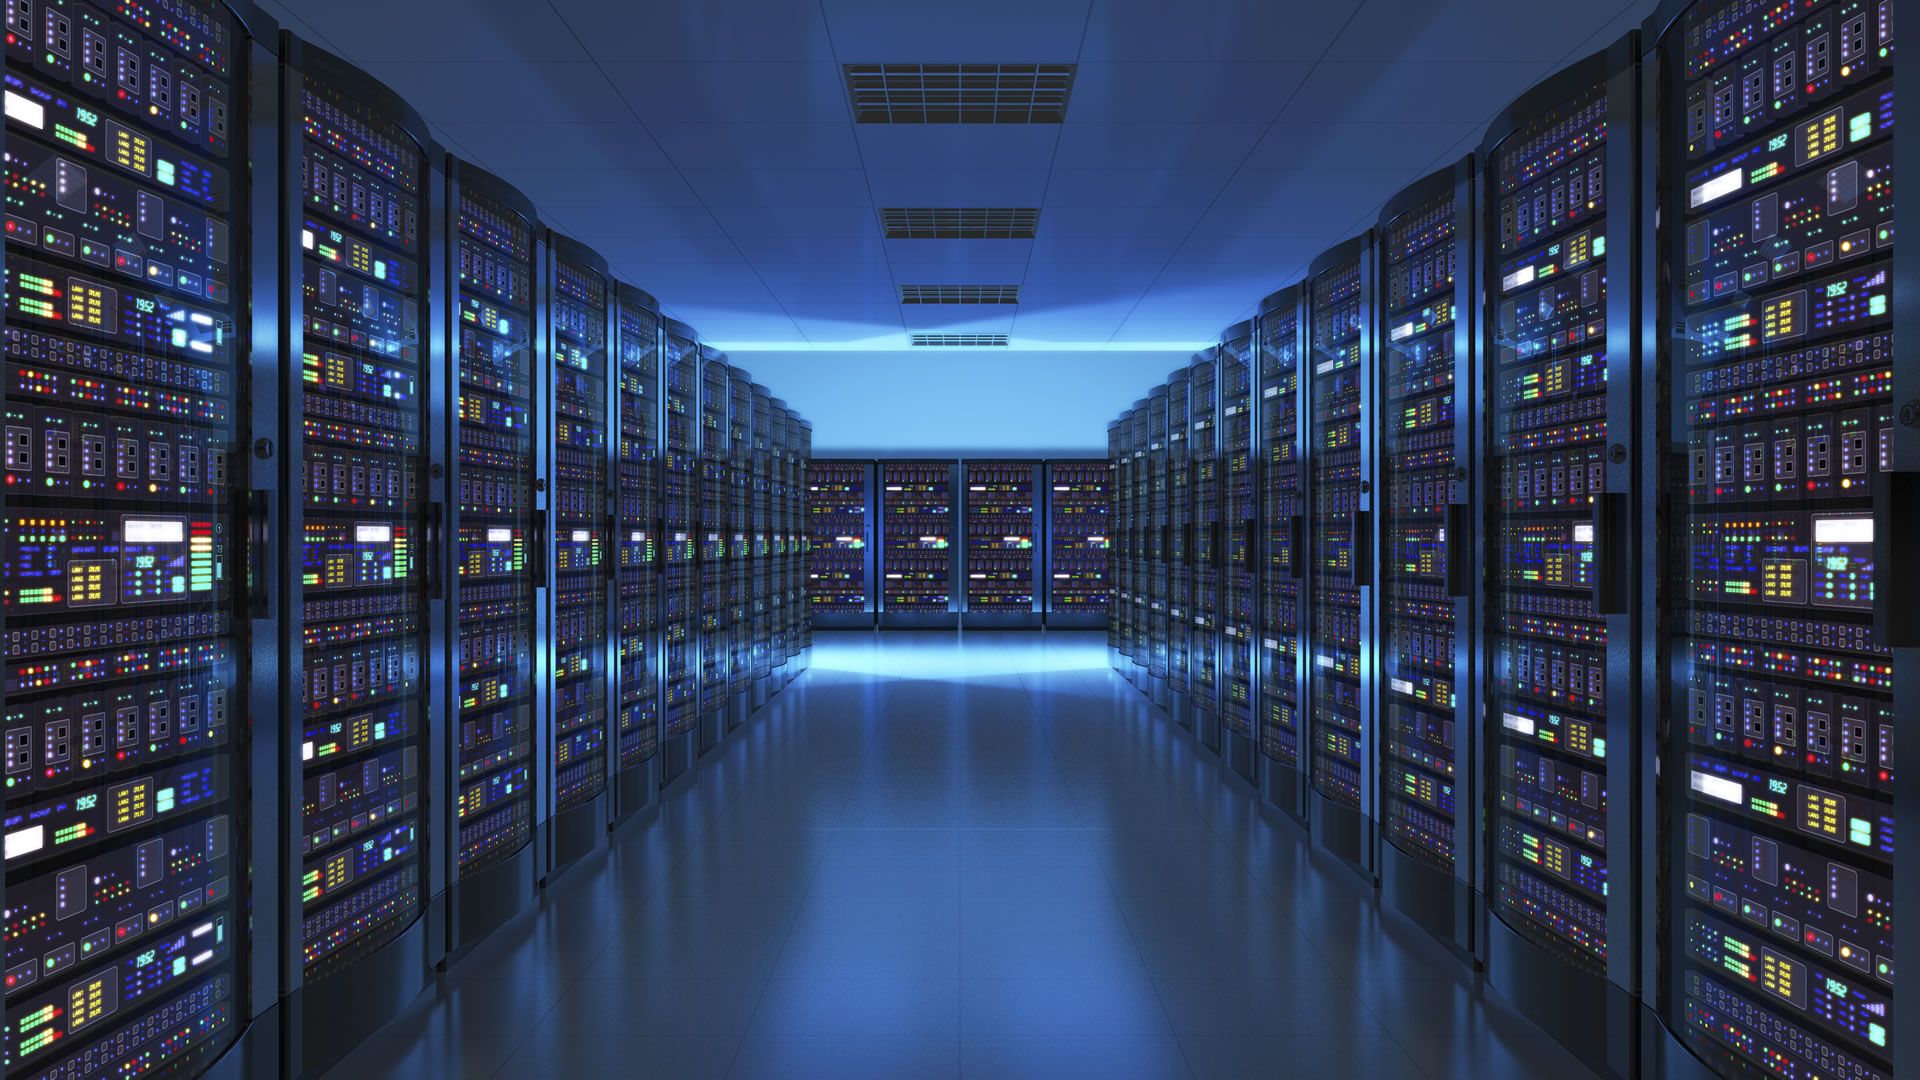 Description: A virtual server room with many rows of servers.